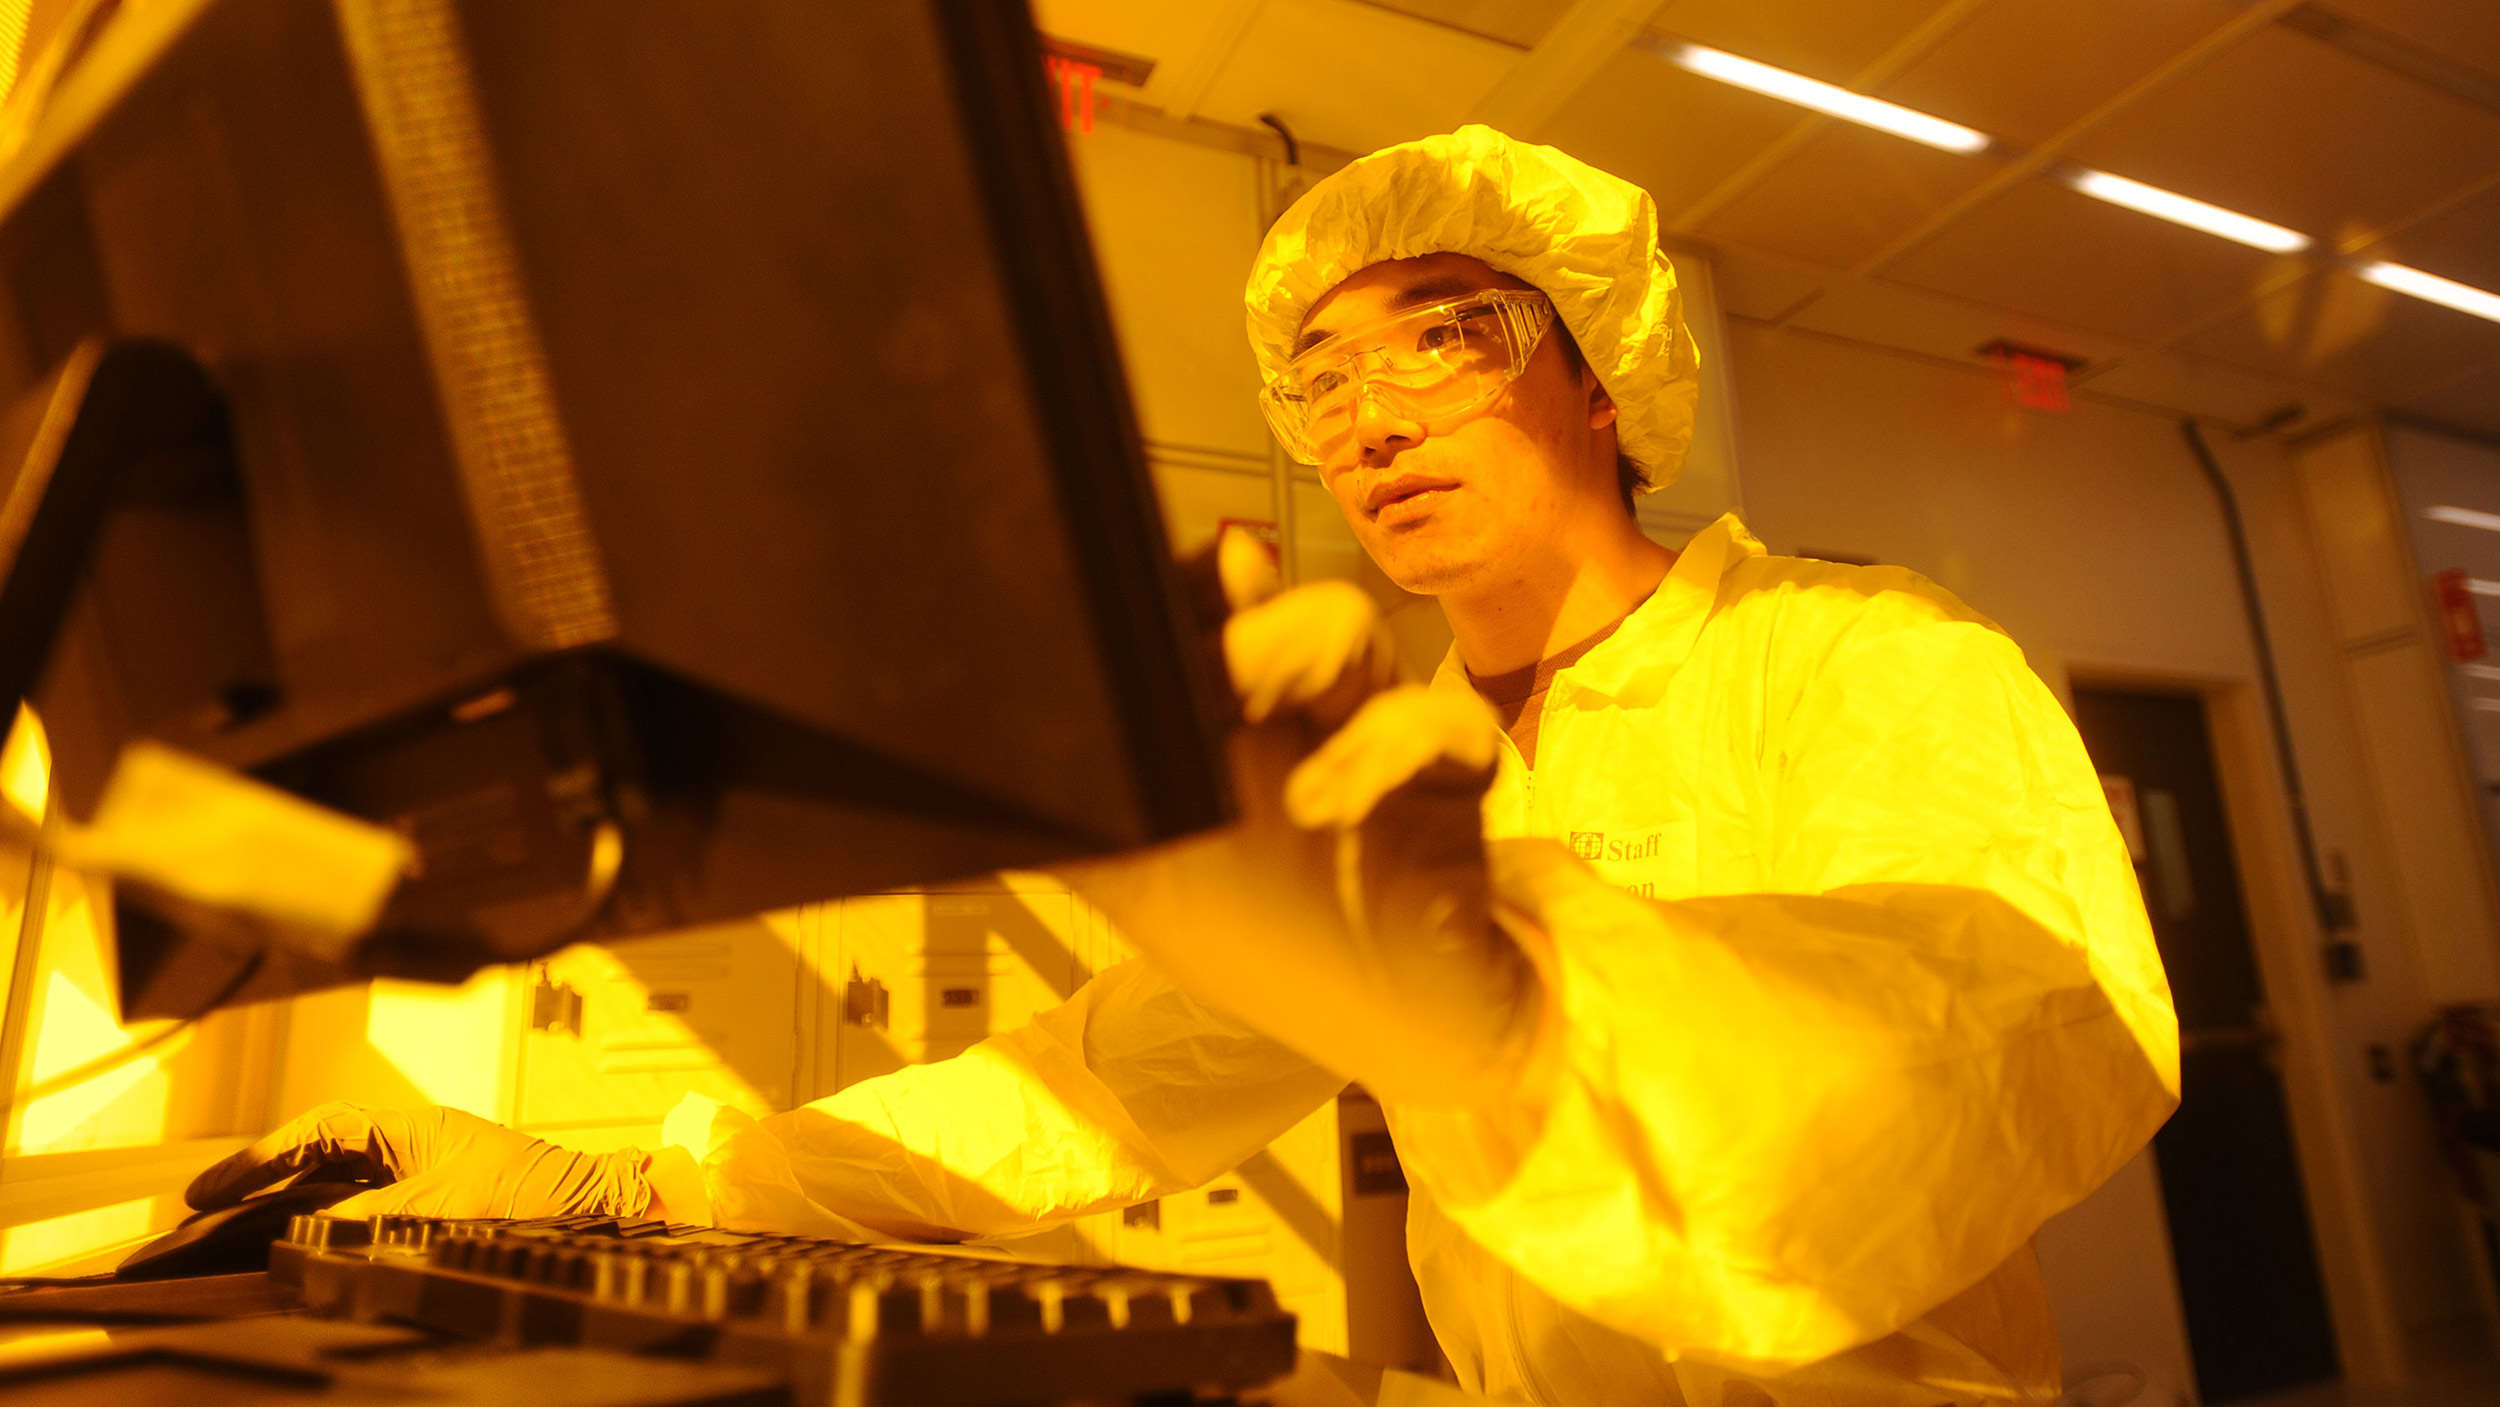 Student at computer in cleanroom